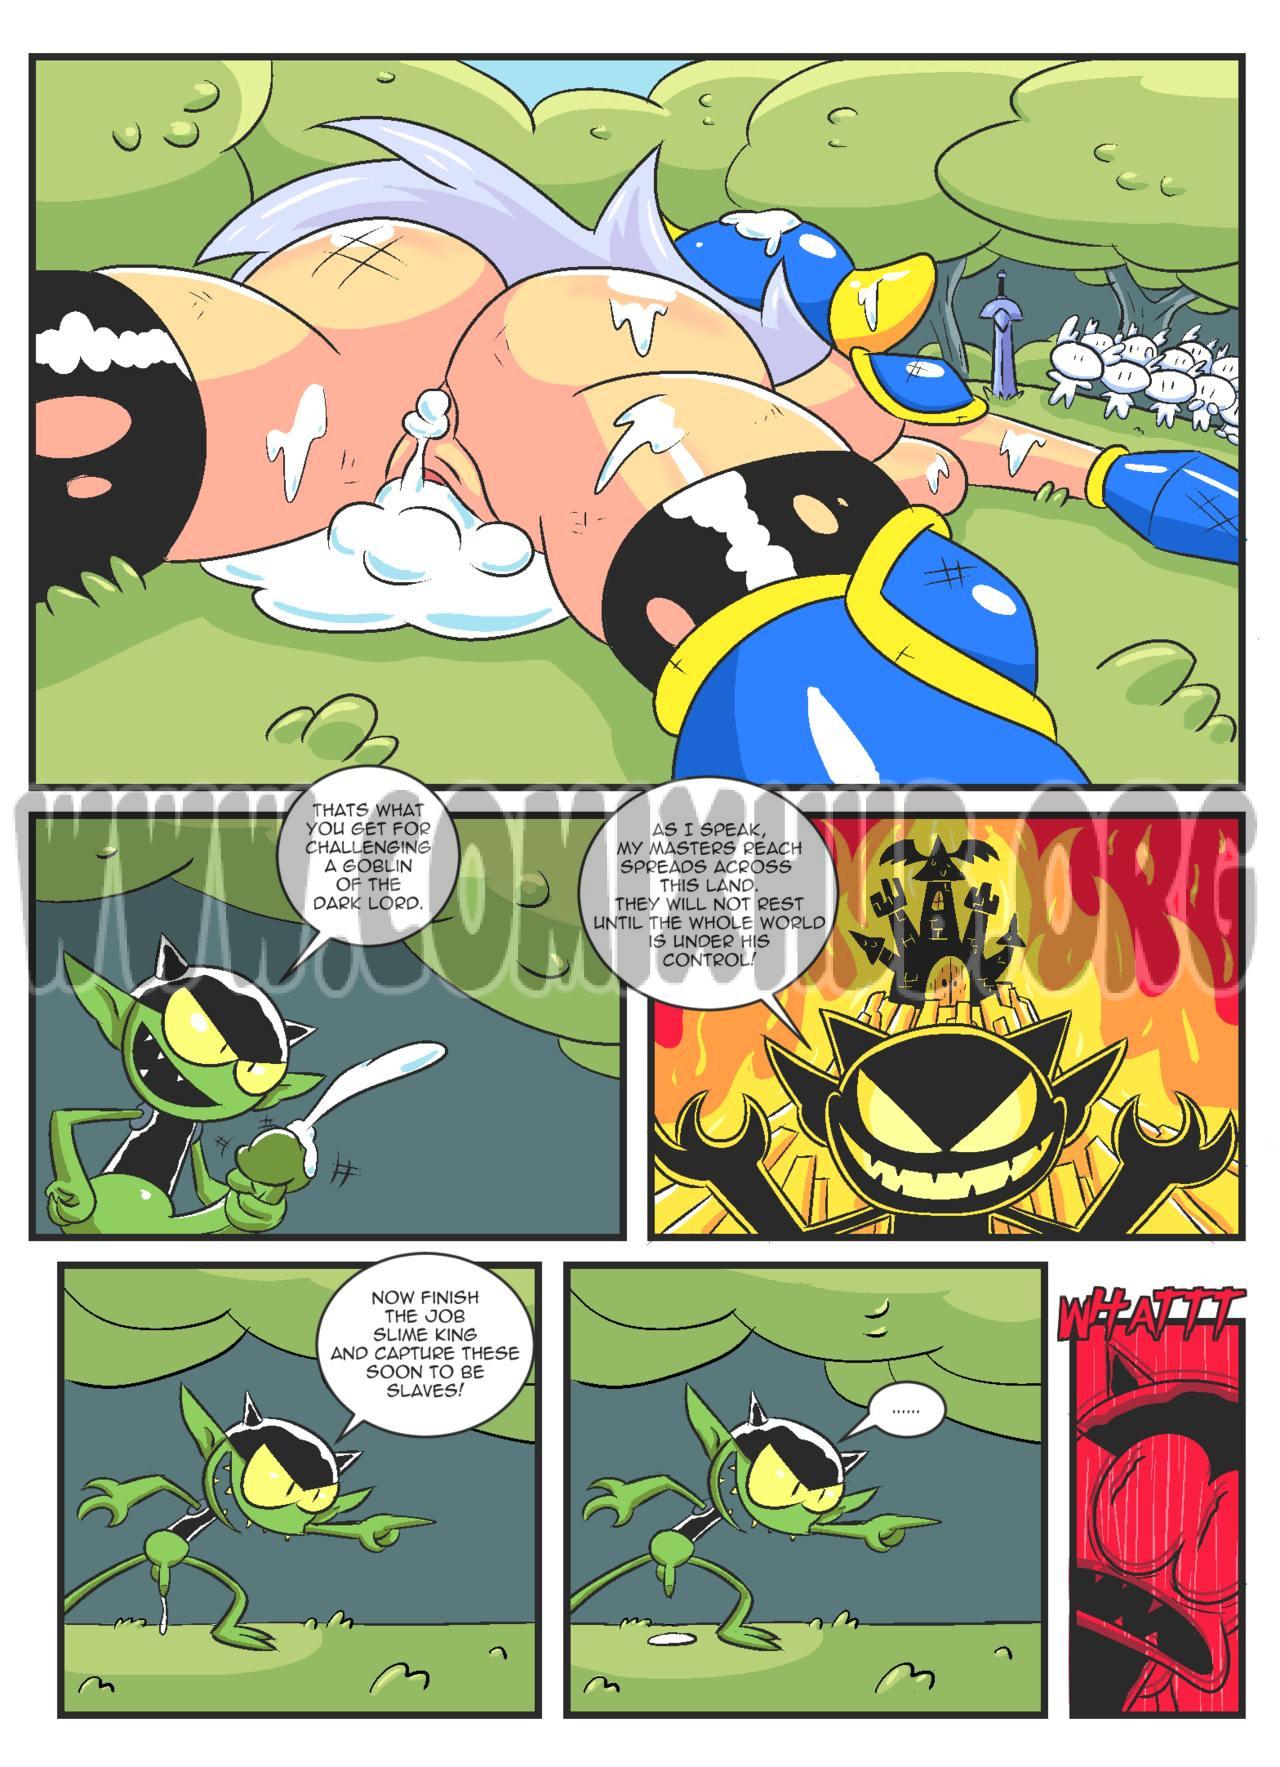 Booby Quest 1-4 porn comics Oral sex, Anal Sex, Blowjob, Creampie, Cum Swallow, Deepthroat, Double Penetration, Fantasy, Group Sex, Rape, Sex and Magic, Stockings, Straight, Tentacles, Threesome